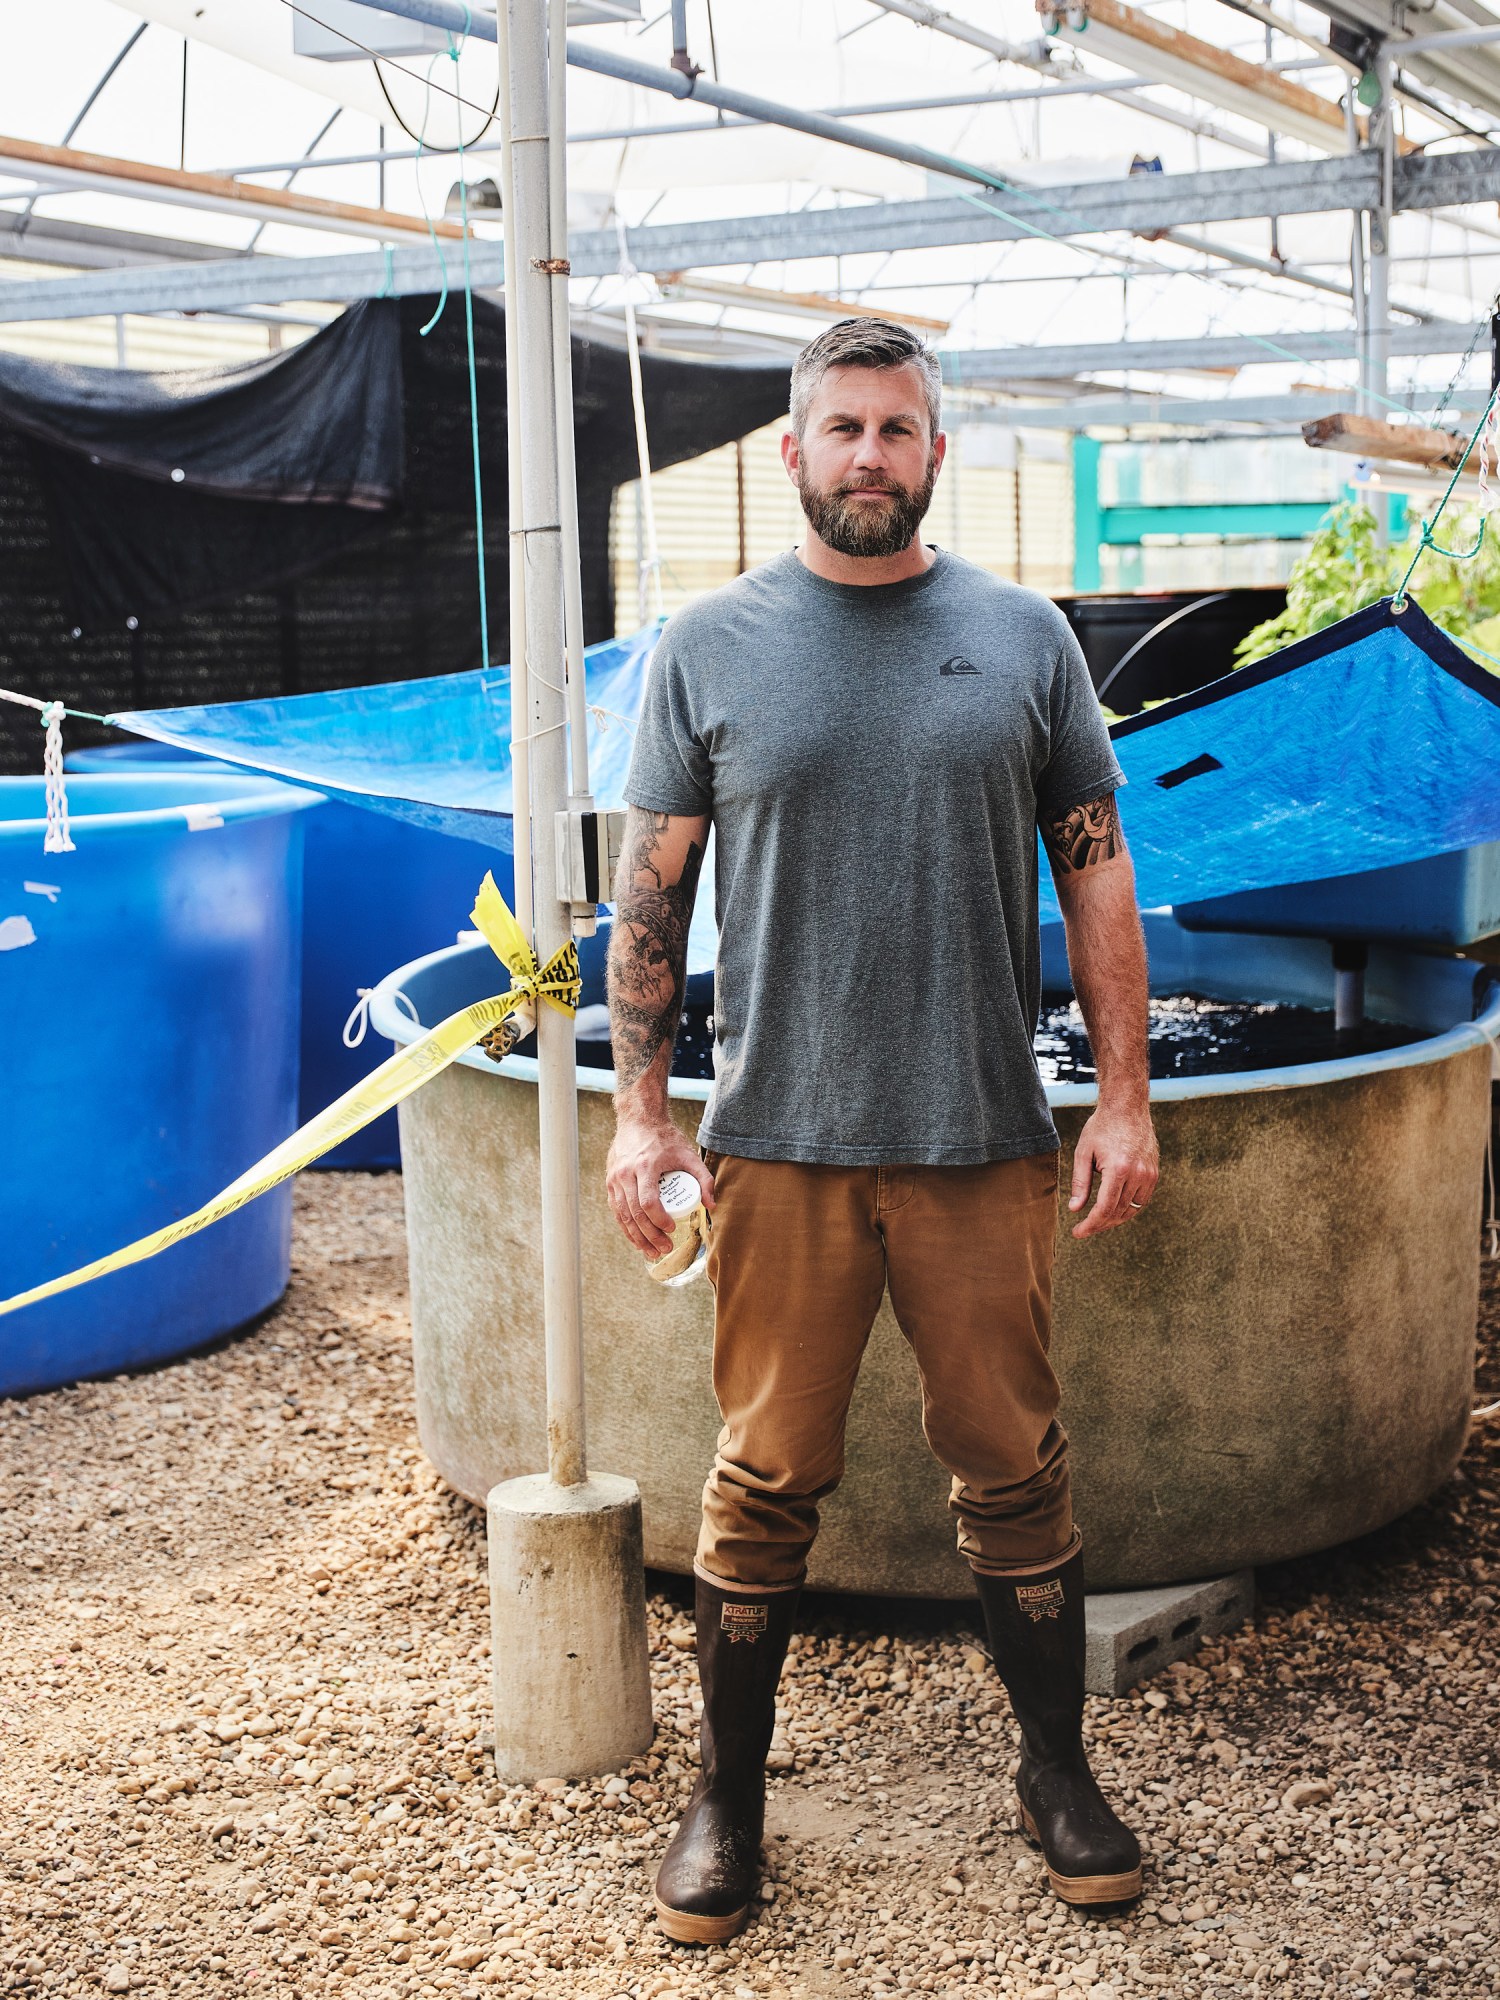 Ed Hale in waders by aquaculture tanks